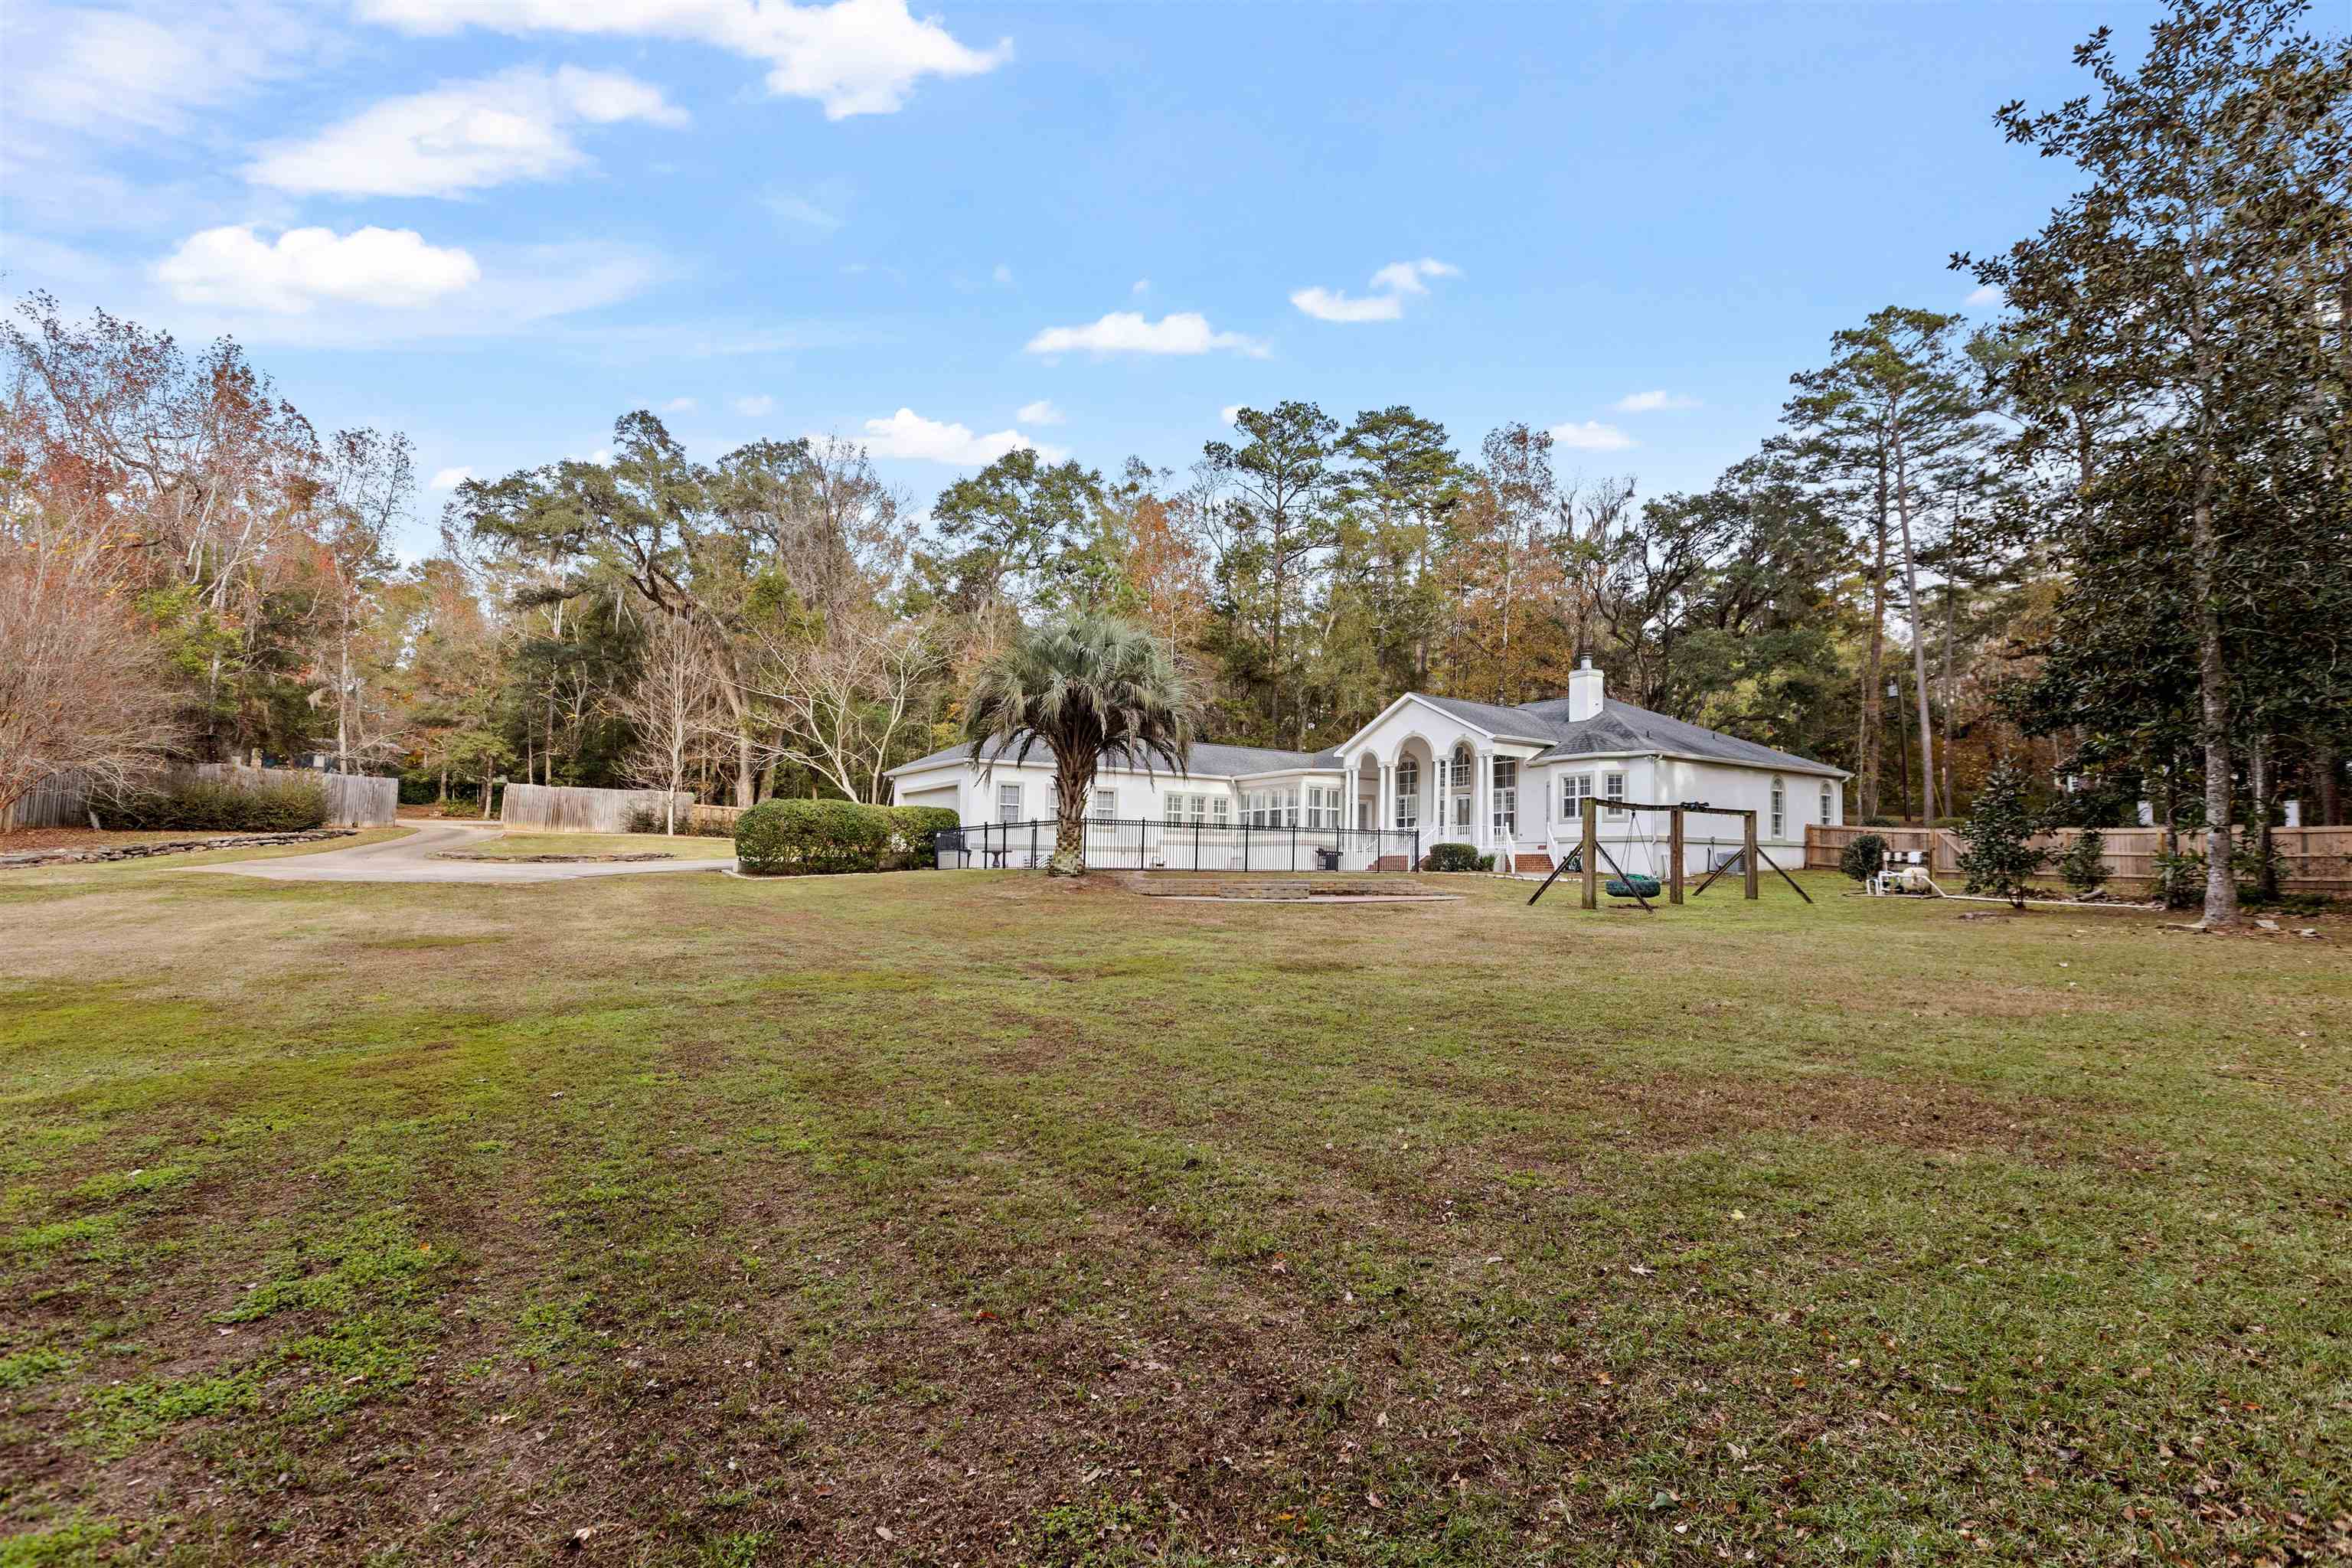 3418 Woodley Road,TALLAHASSEE,Florida 32312,4 Bedrooms Bedrooms,4 BathroomsBathrooms,Detached single family,3418 Woodley Road,366575